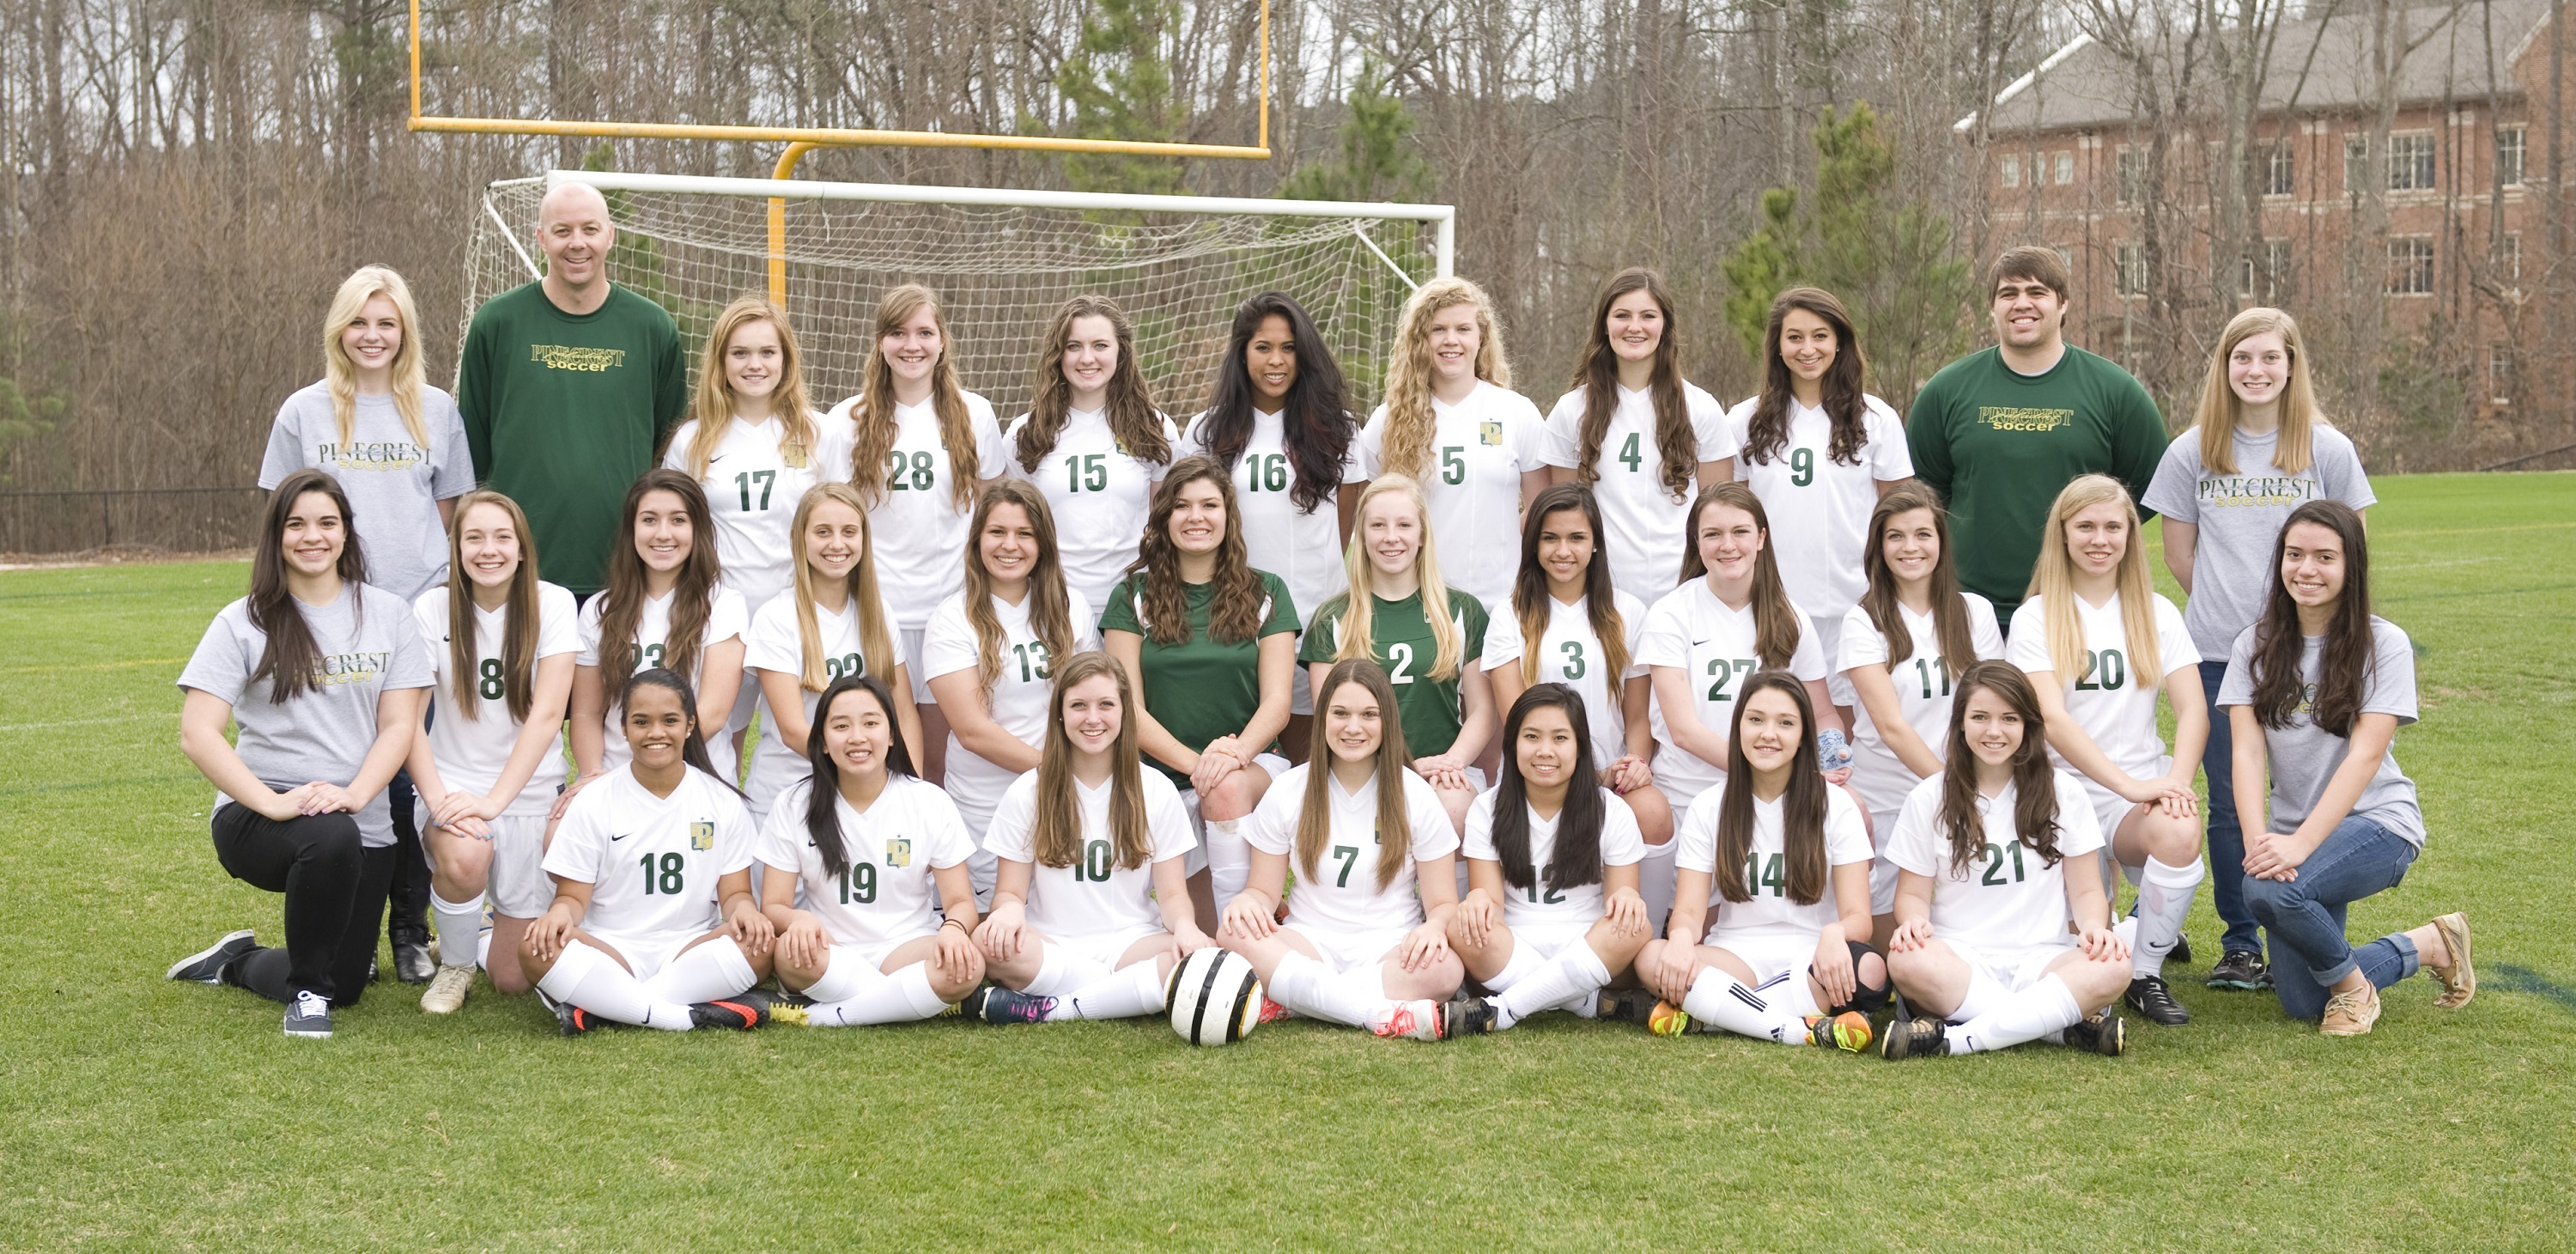 Pinecrest Academy 2014 Varsity Boys and Girls Soccer Teams Honored for Academic Excellence